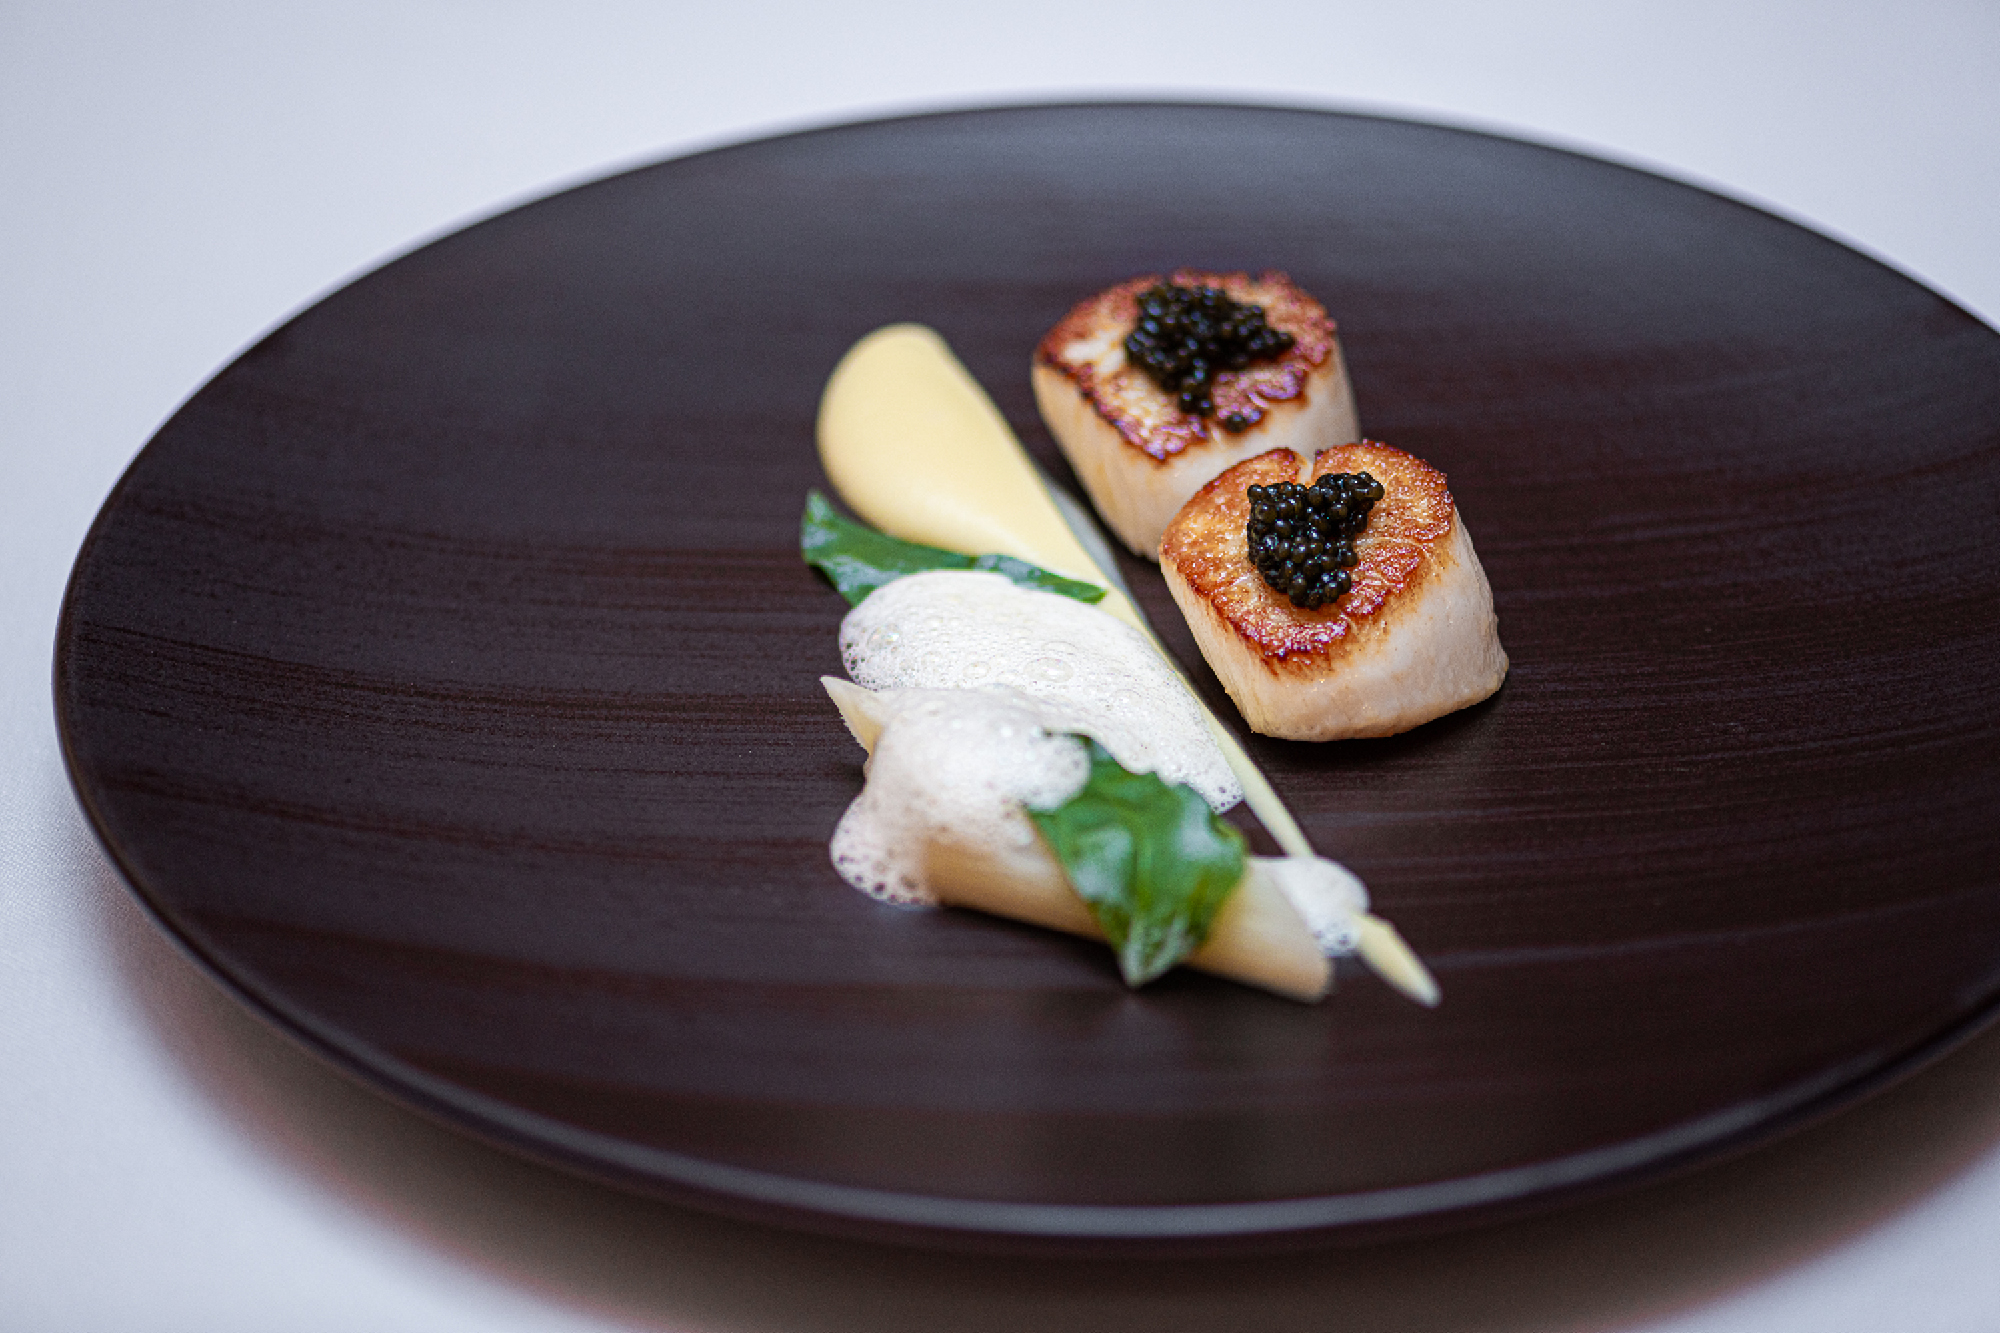 Seared Hand Dived Scottish Scallops with Salsify Purée, Champagne Sauce and Oscietra Caviar